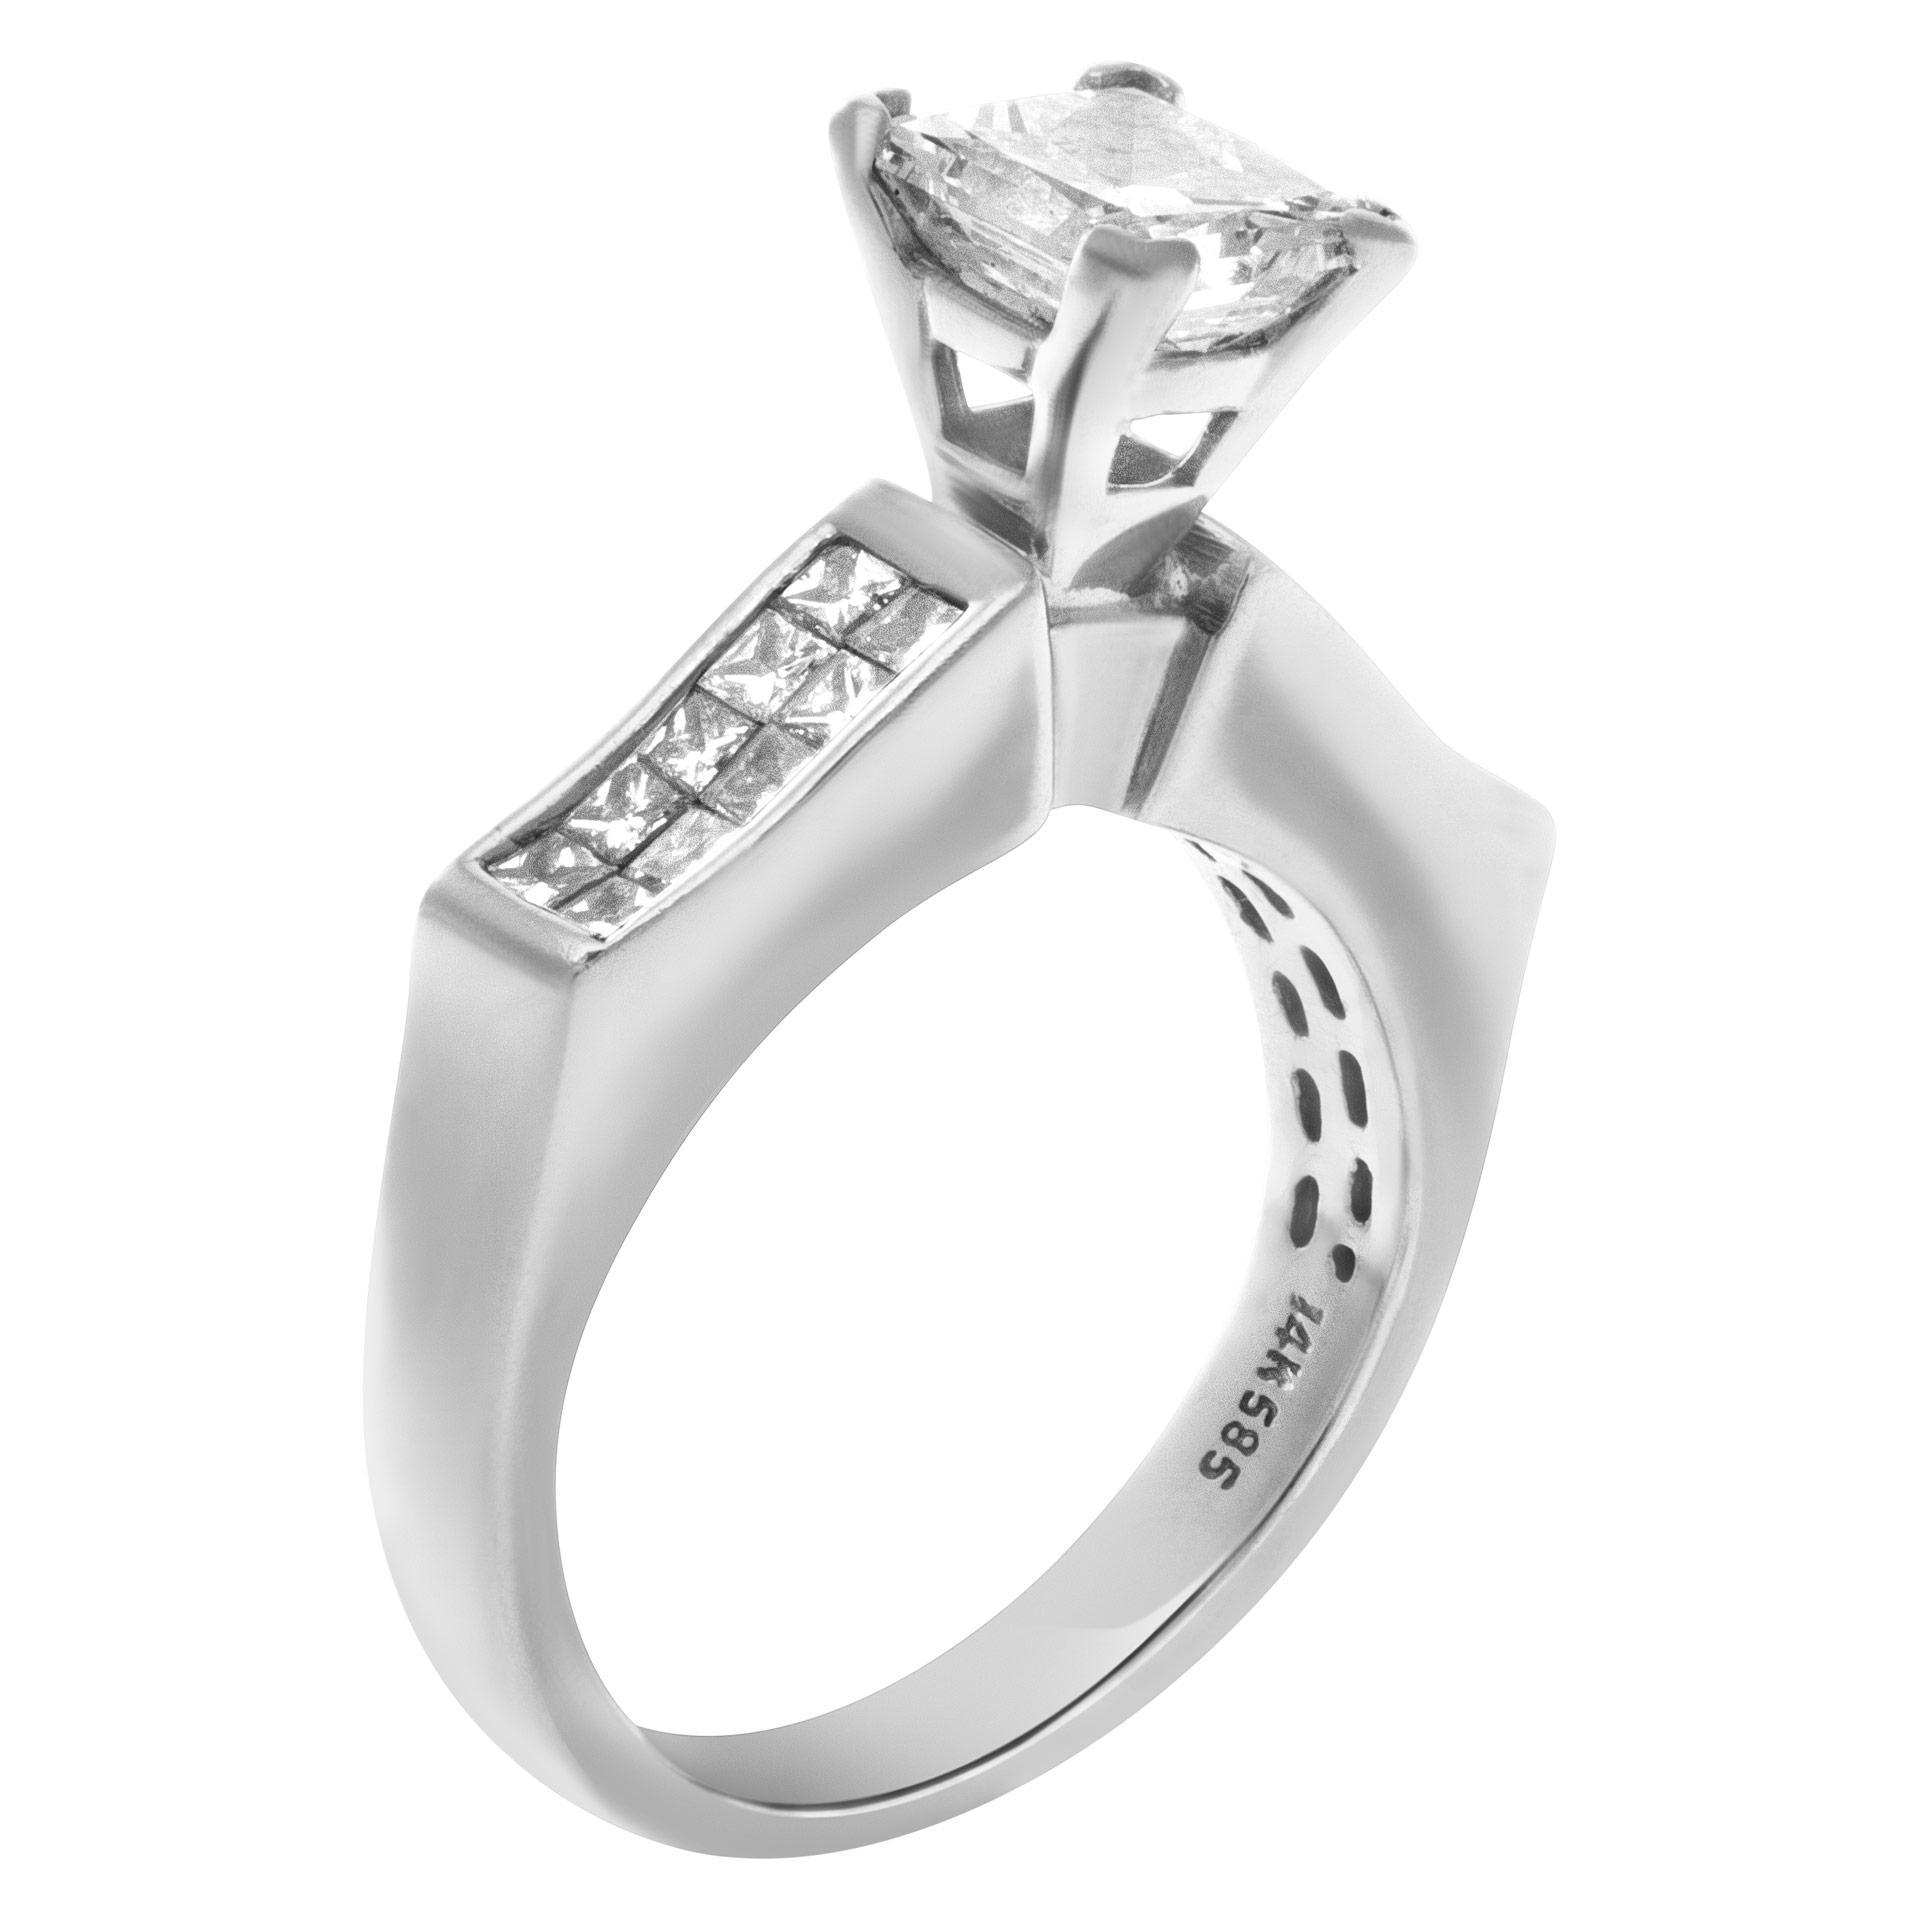 GIA certified diamond engagement ring with 1.01cts rectangular diamond (F color, SI2 clarity) set in 14k white gold image 2